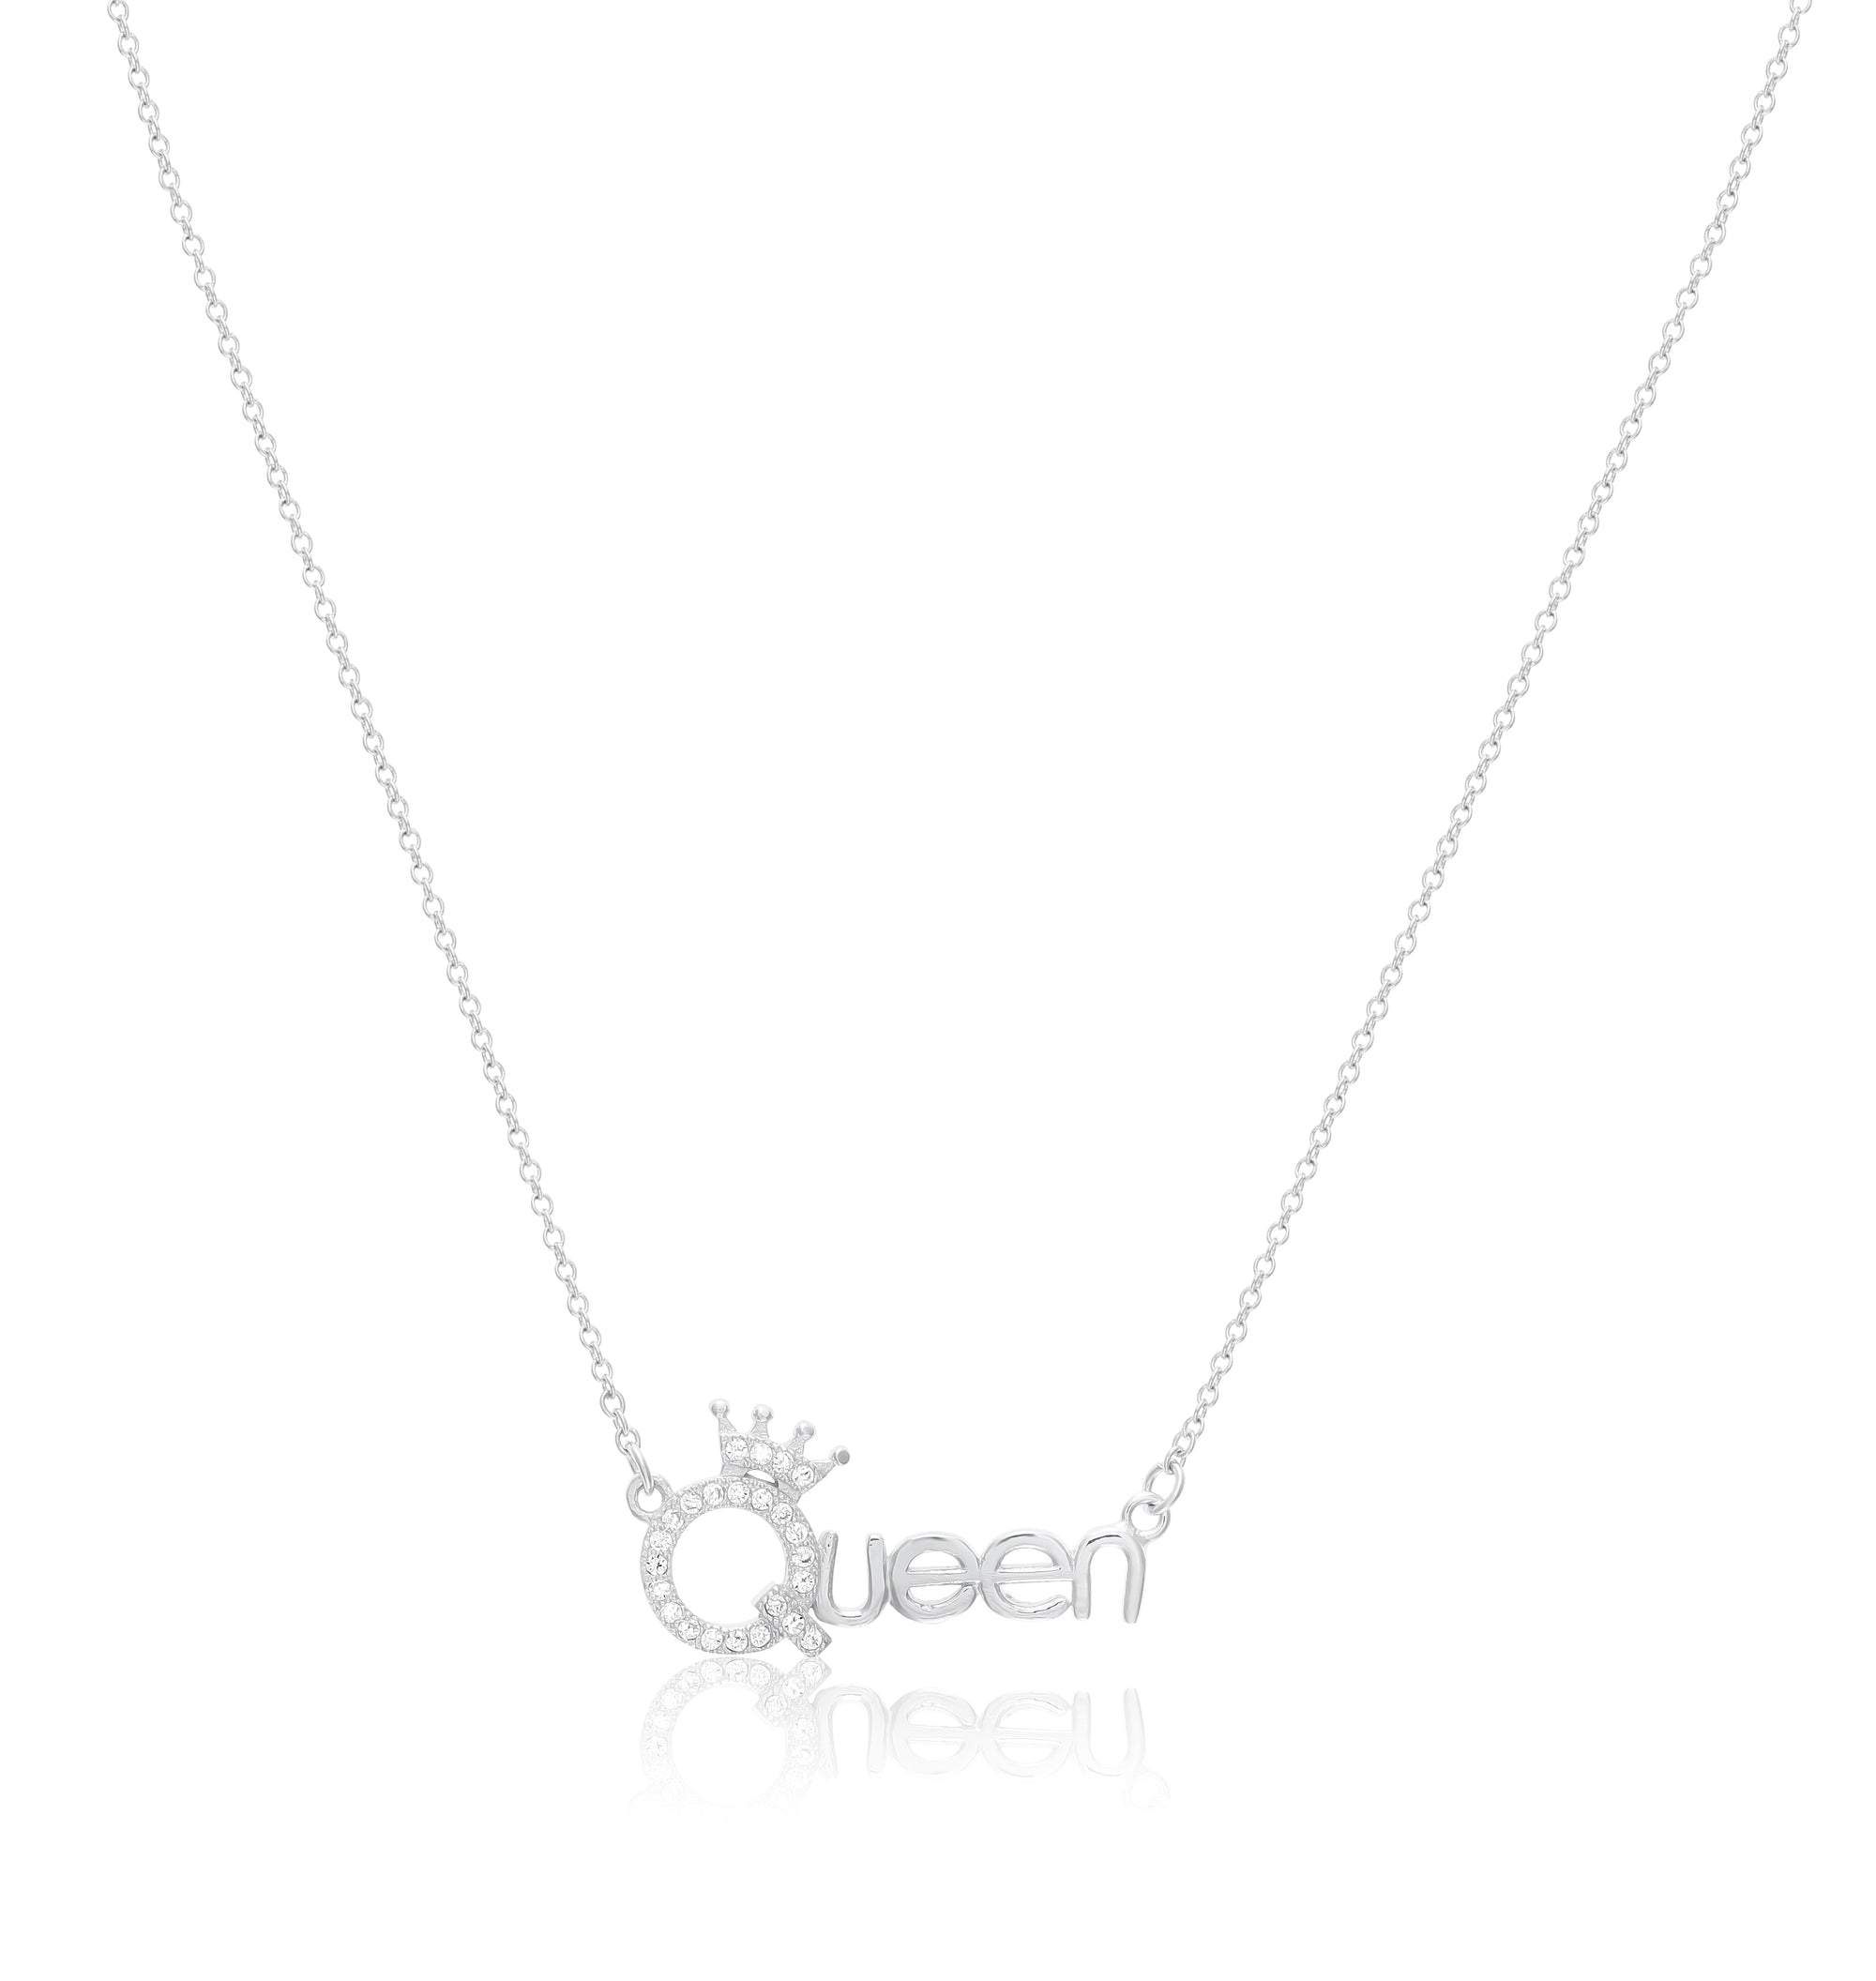 CZ QUEEN Word Necklace in Sterling Silver